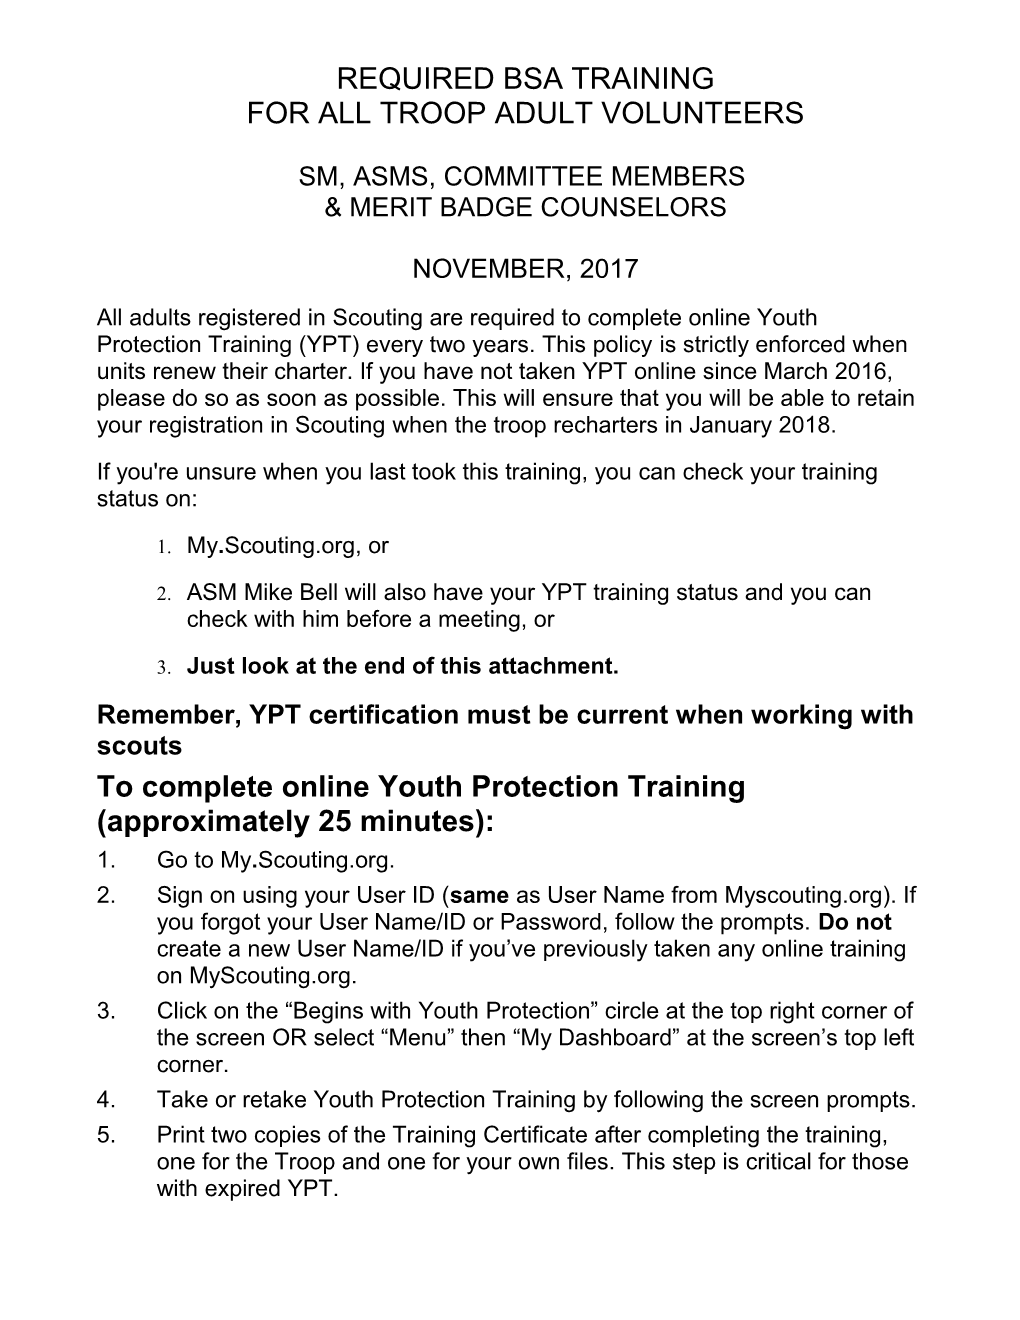 Youth Protection Training Now Required of All Troop Adult Volunteers ( Sm, Asms, Committee